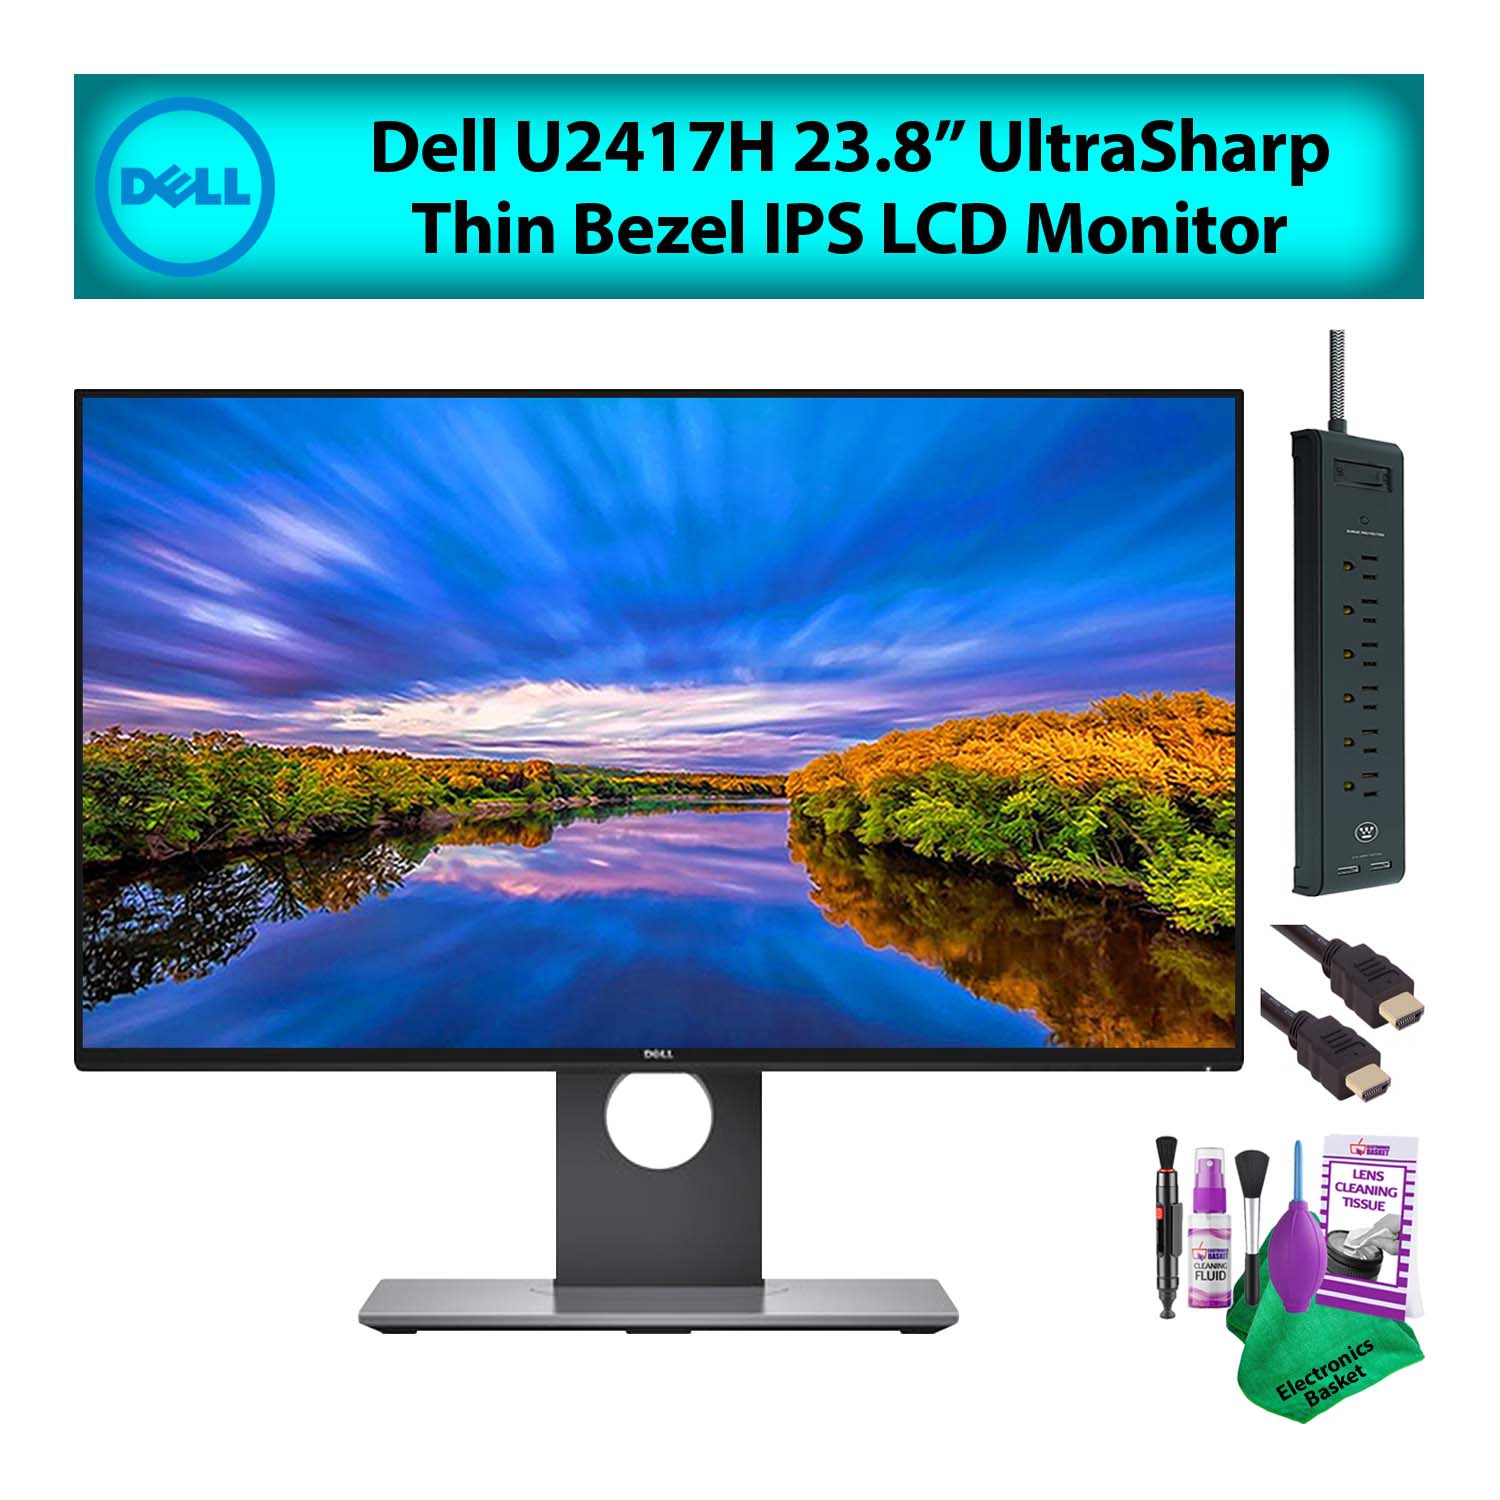 Dell Ultrasharp U2417h Where To Buy At The Best Price In The Canada